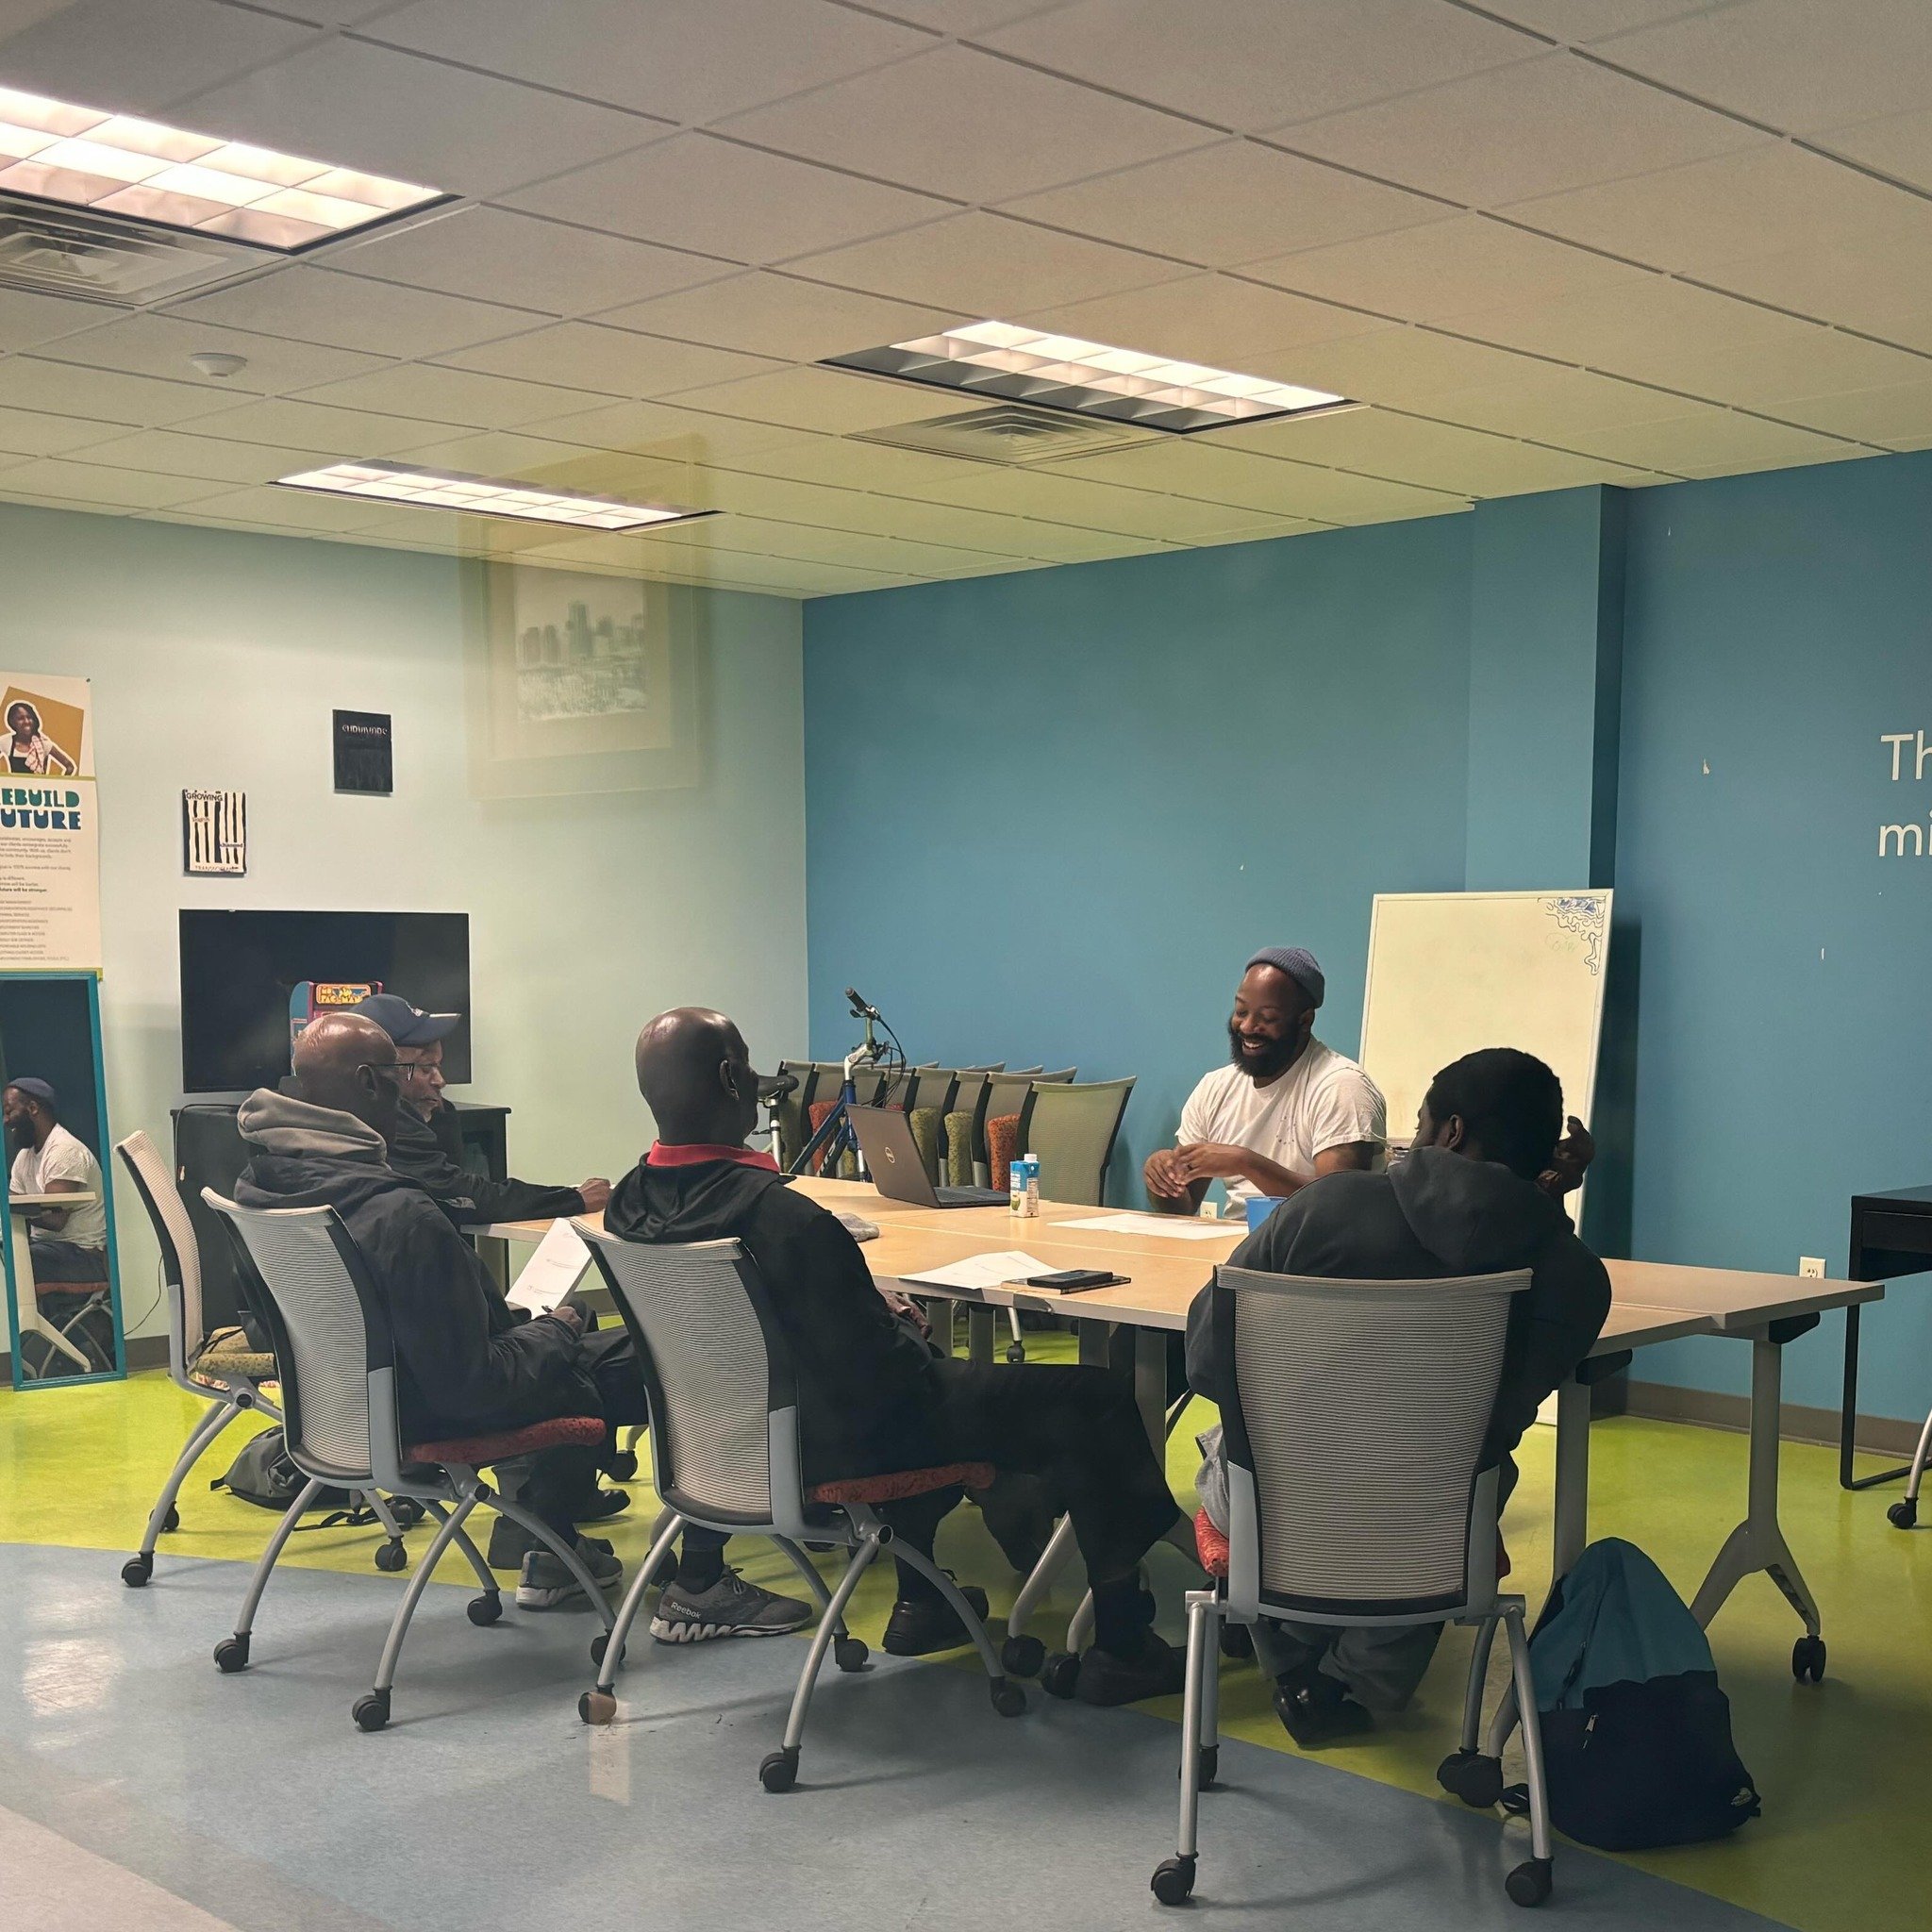 Yesterday&rsquo;s Peer Support group was great! Good discussion and laughter supporting each other on the reentry journey. #rva #reentrymatters #secondchancemonth ❤️